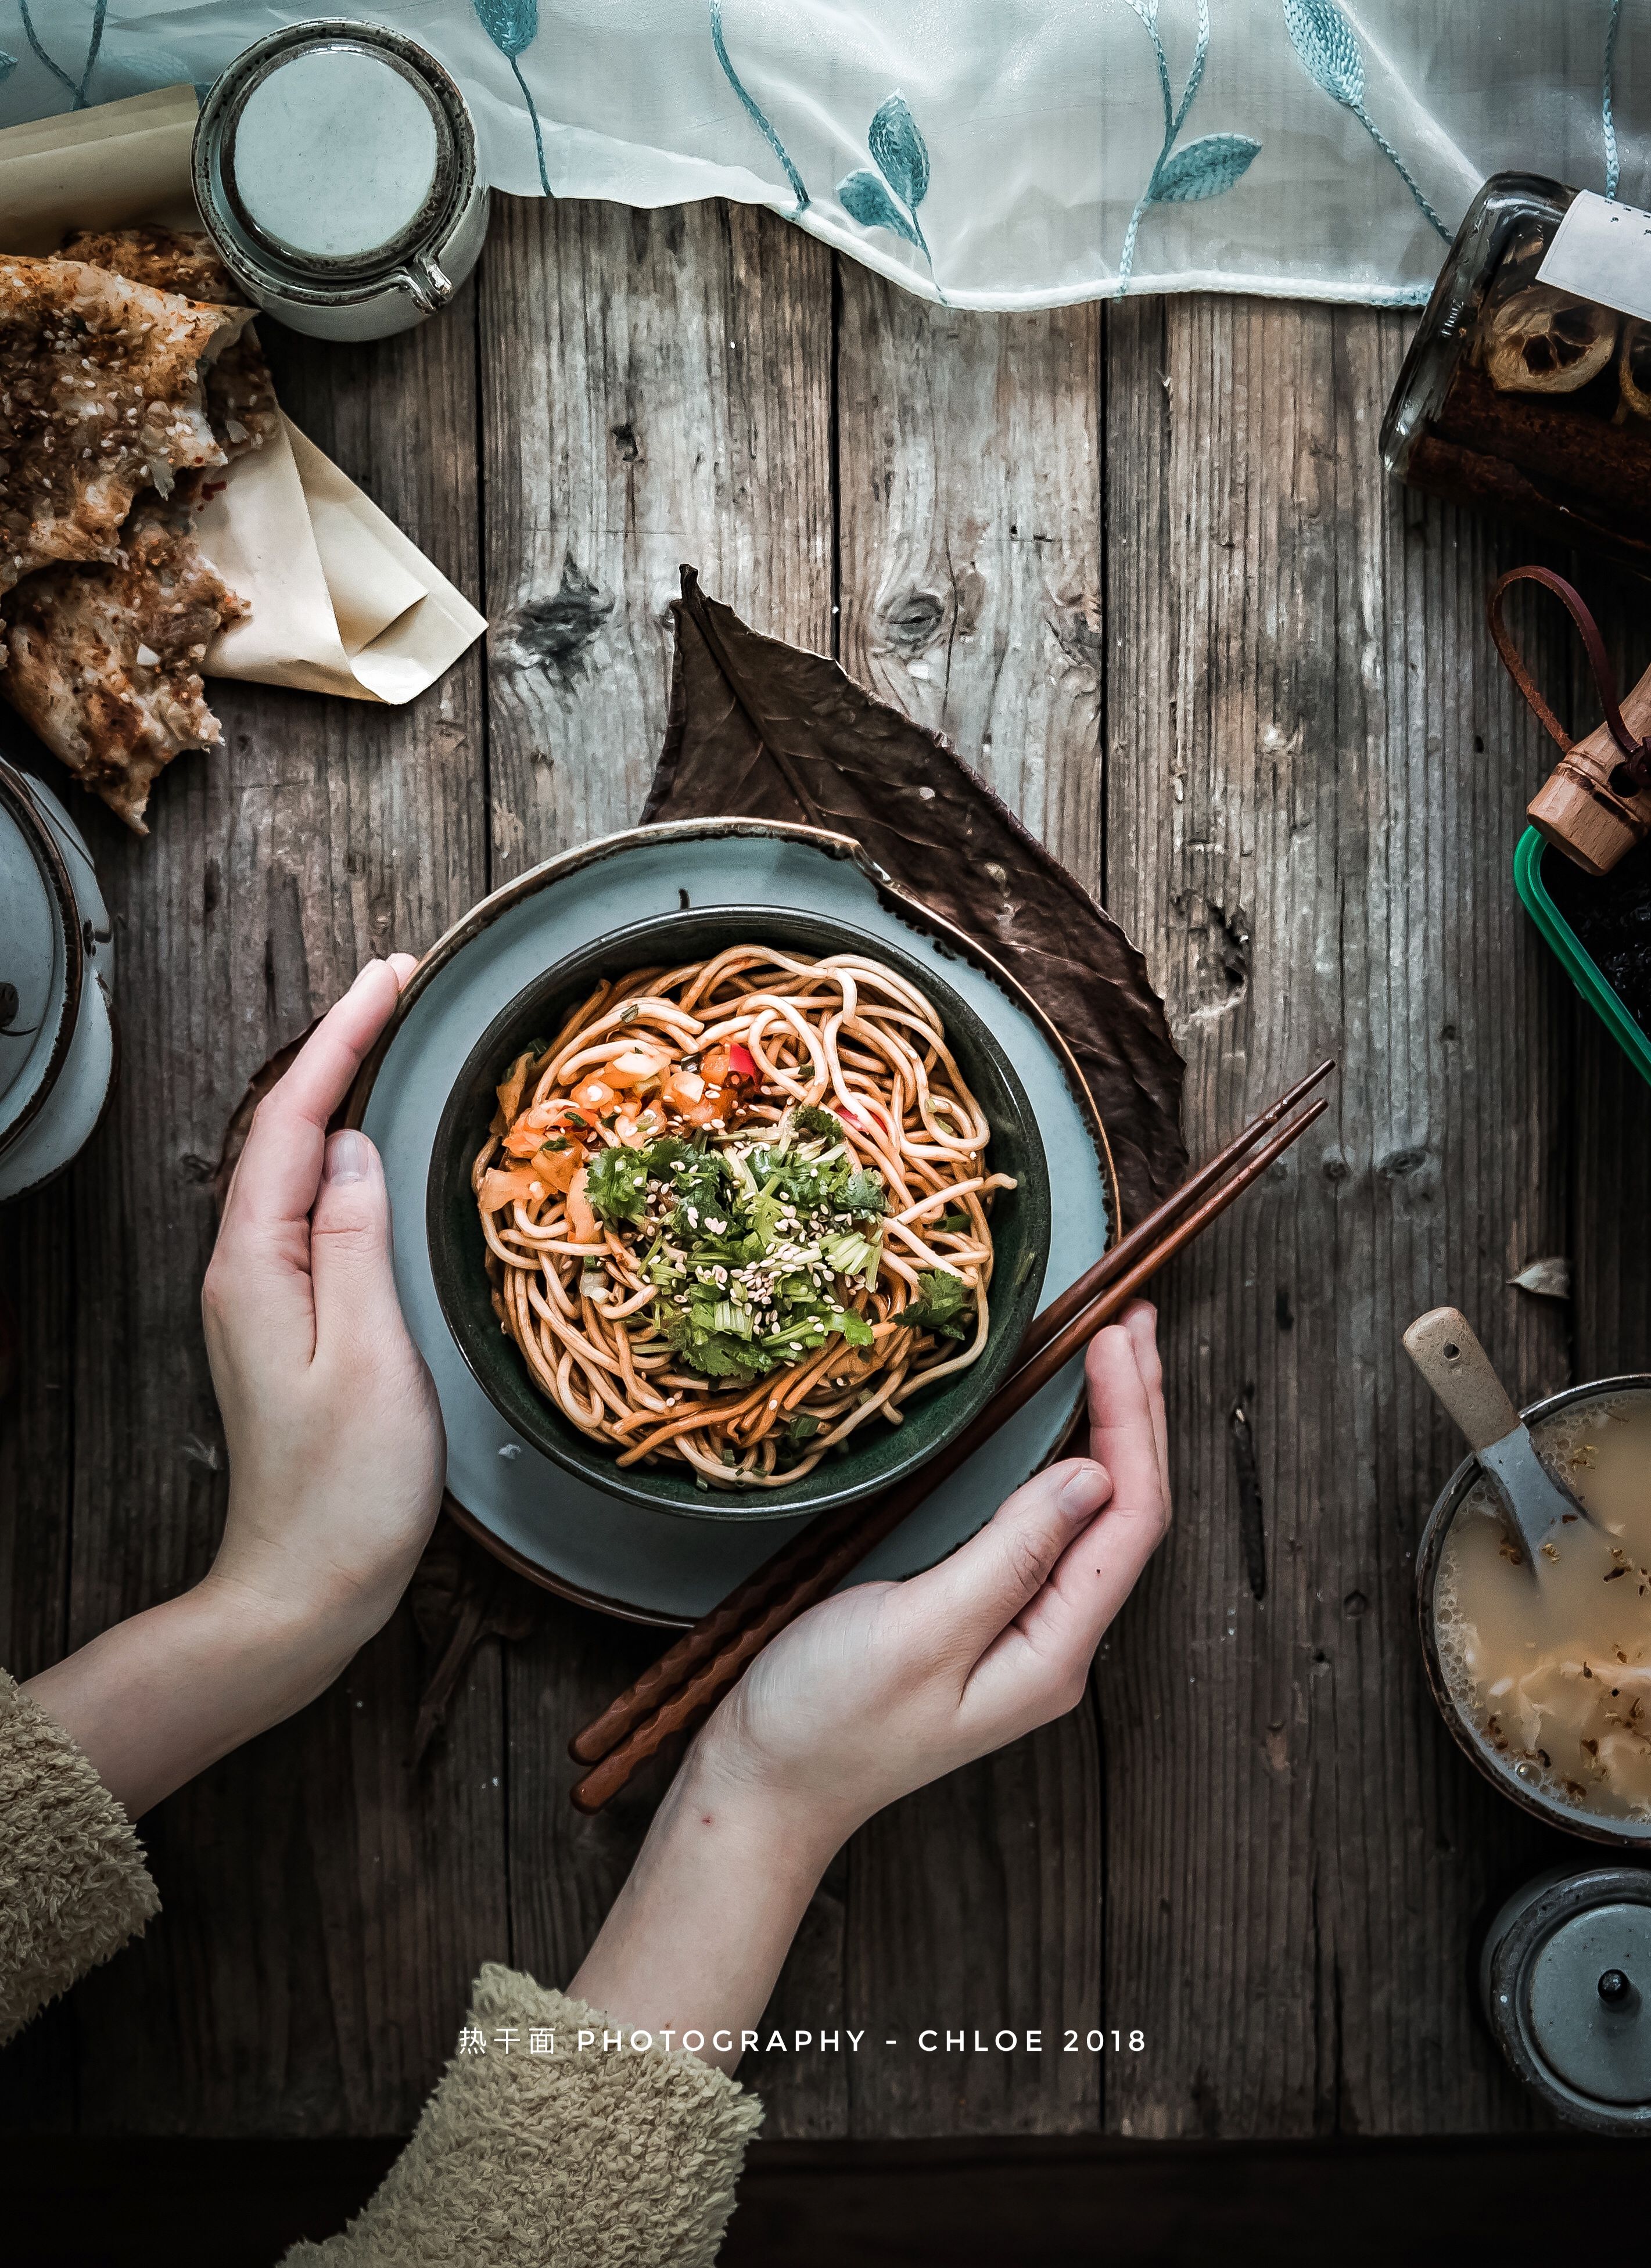 hot noodles with sesame paste. Food photo, Food